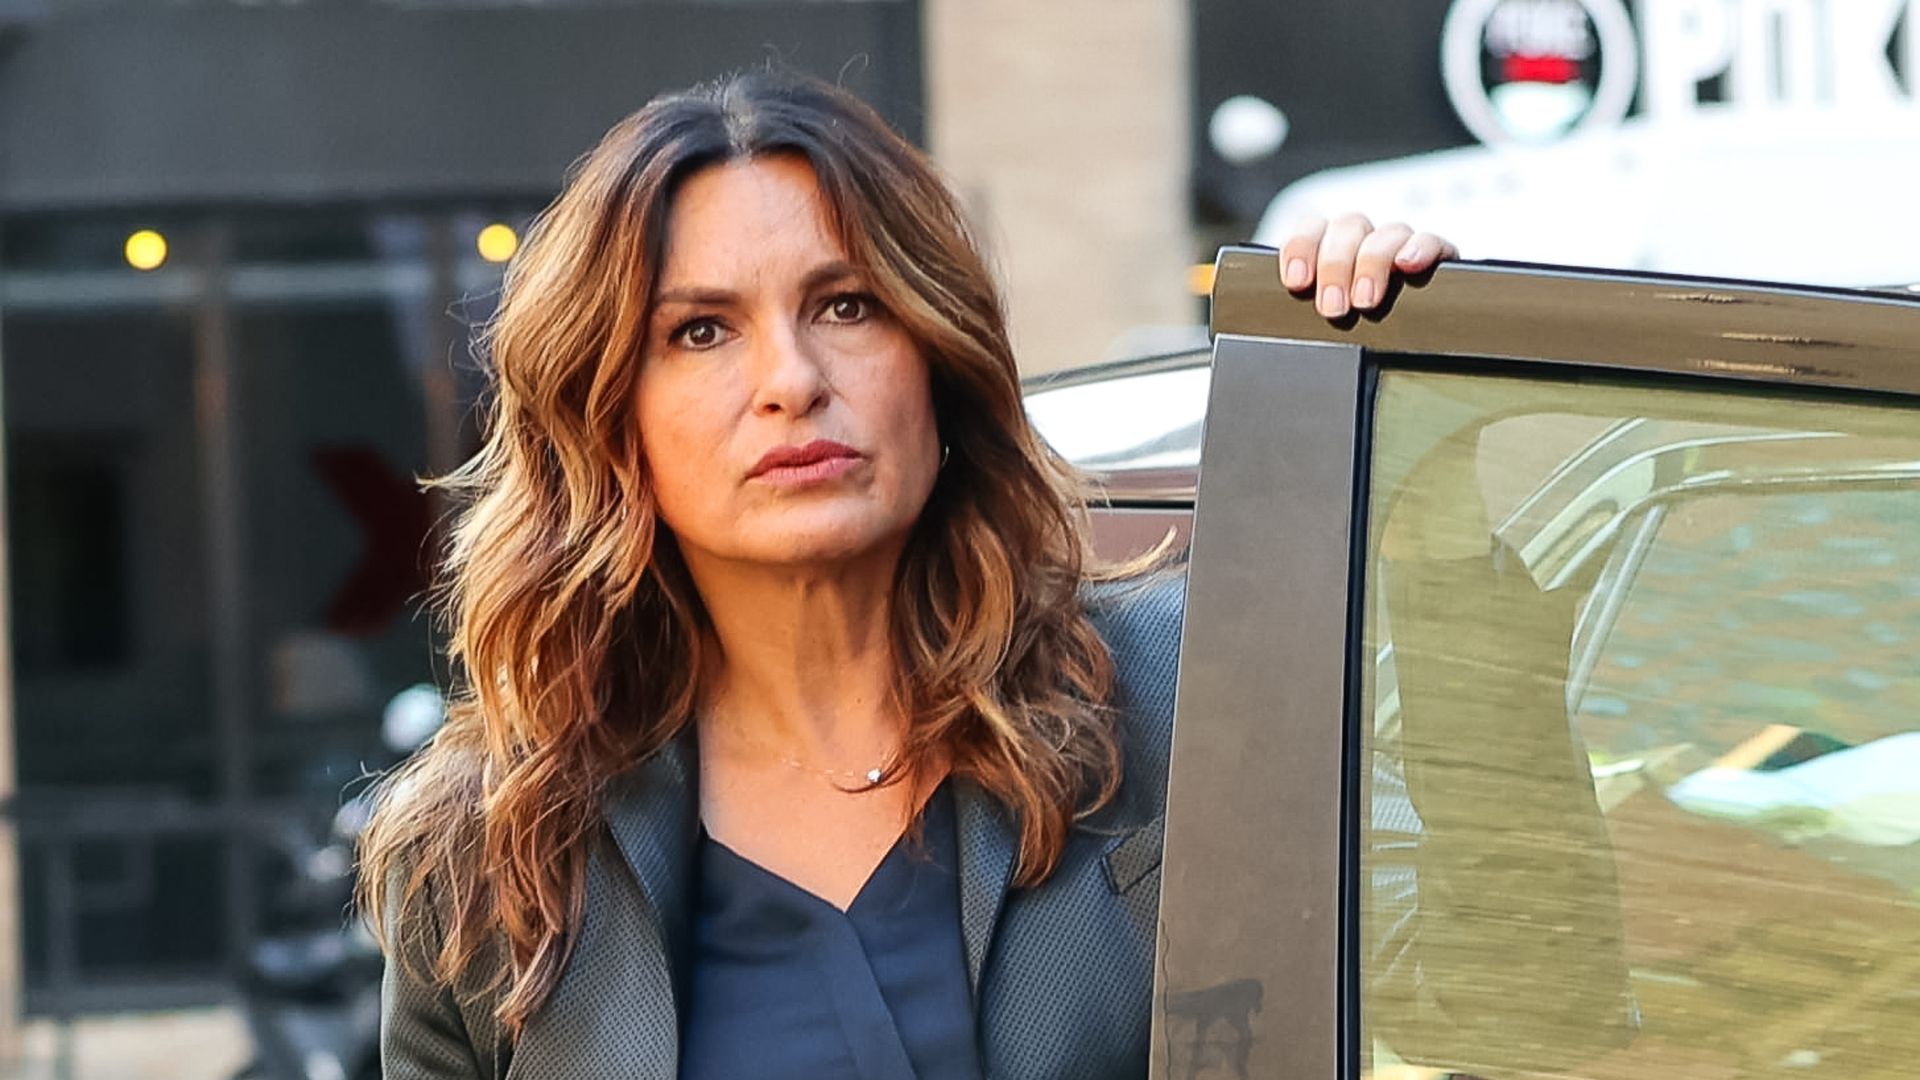 Mariska Hargitay is seen on the film set of the "Law and Order: Special Victims Unit" TV Series on September 21, 2022 in New York City